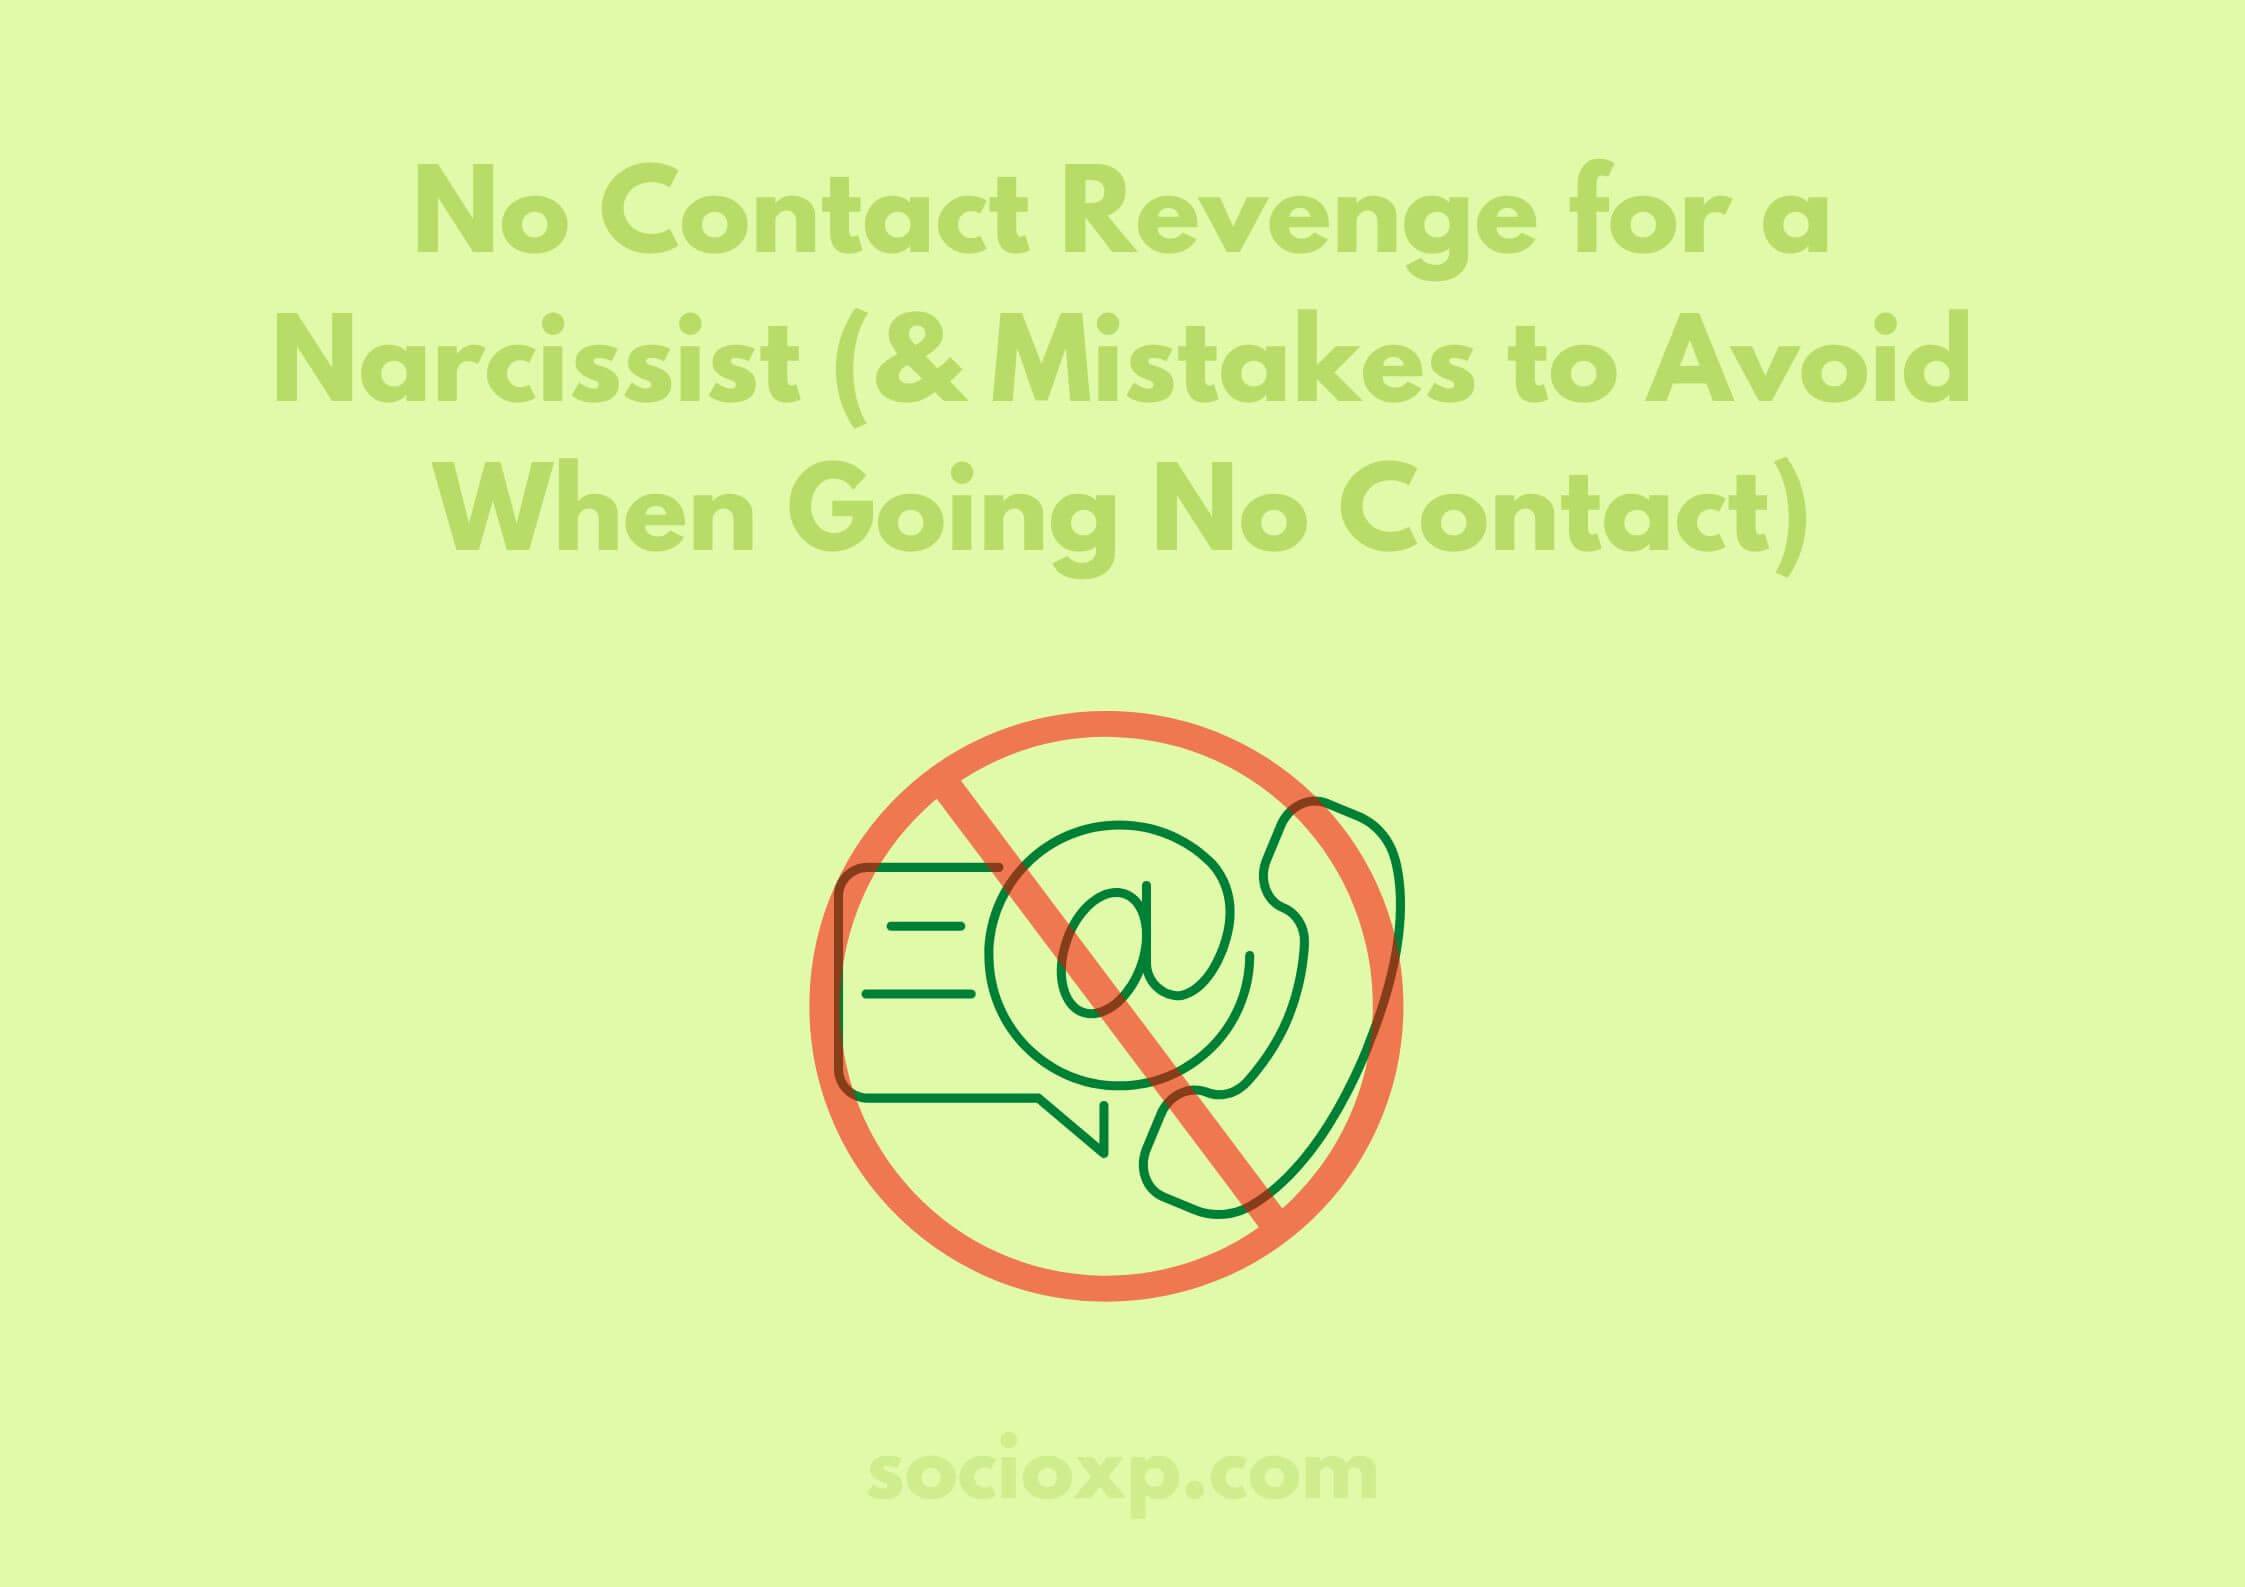 No Contact Revenge for a Narcissist (& Mistakes to Avoid When Going No Contact)